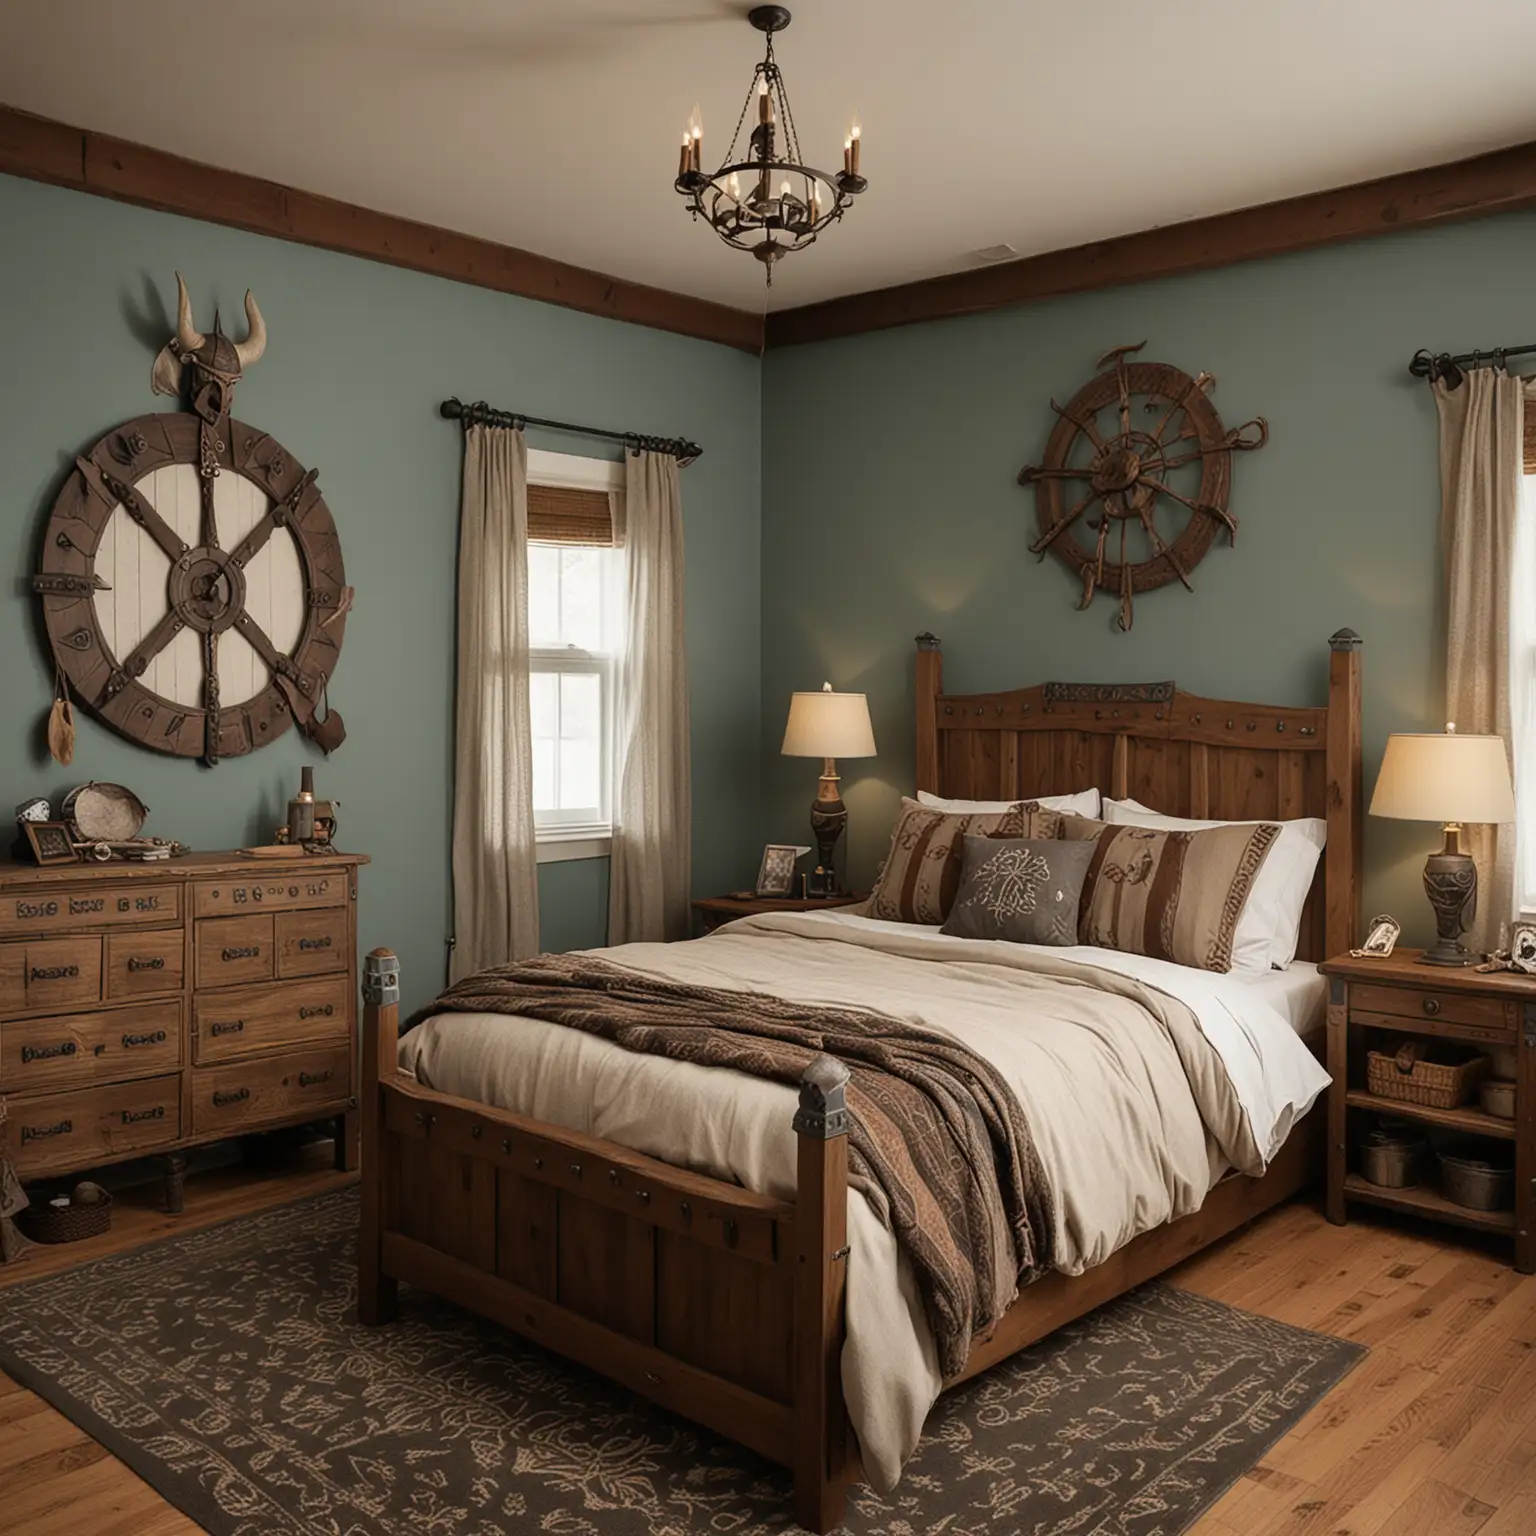 viking themed bedroom.  modest and average northeastern american home with viking, Nordic, Icelandic themed colors for paint and furniture.  